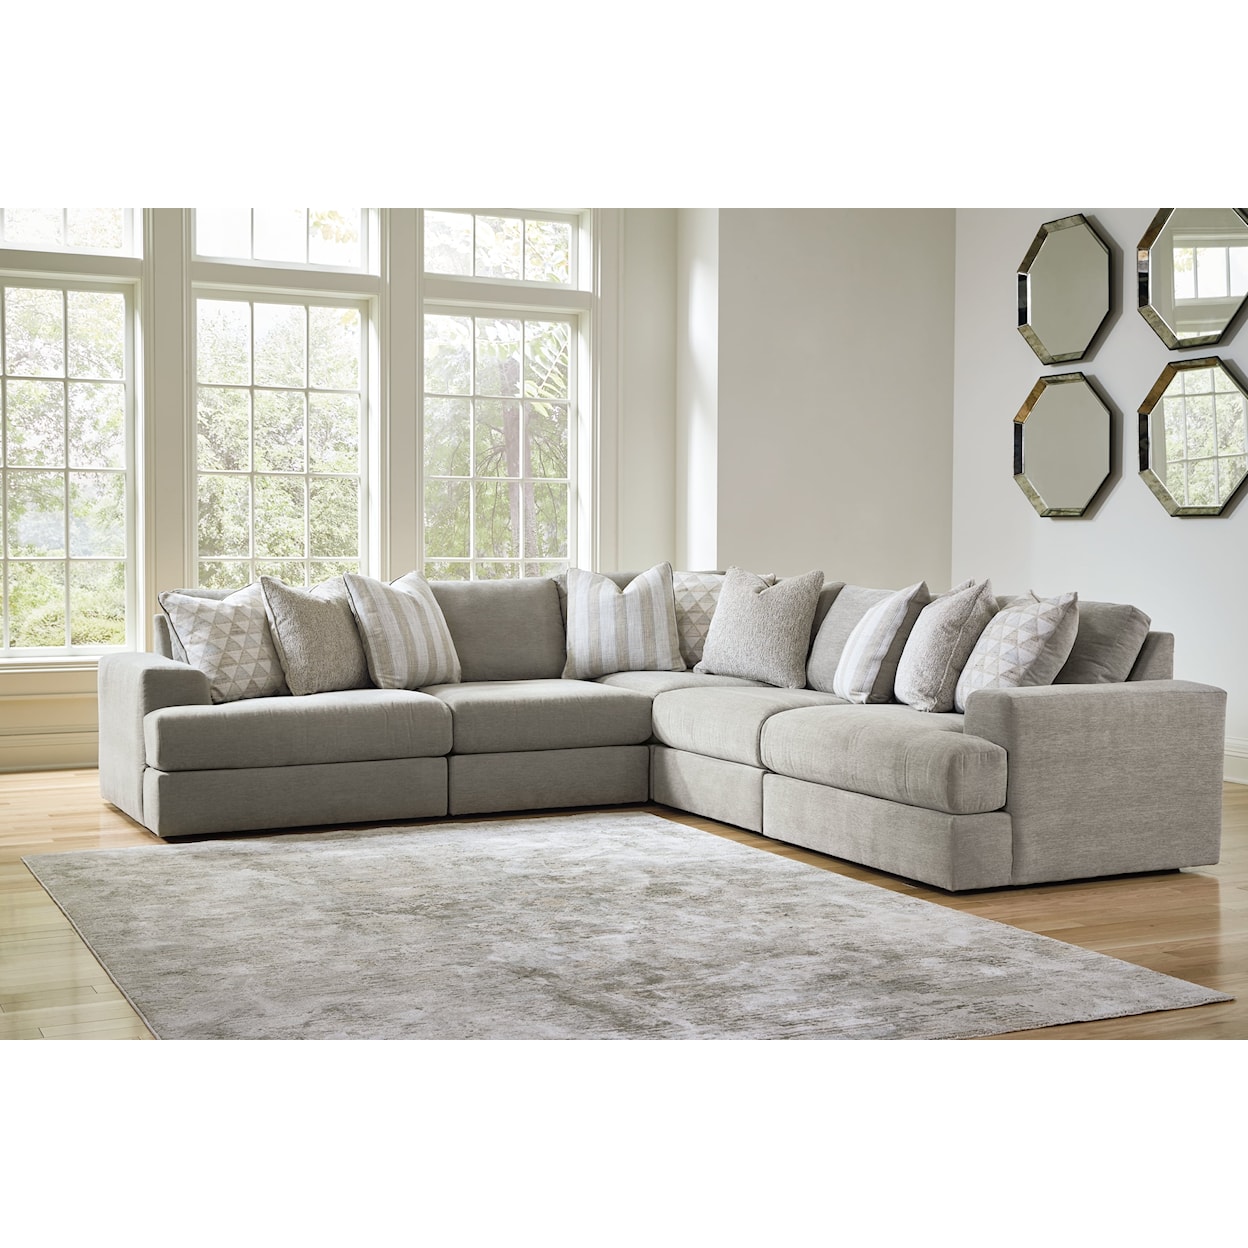 Benchcraft Avaliyah 5-Piece Sectional